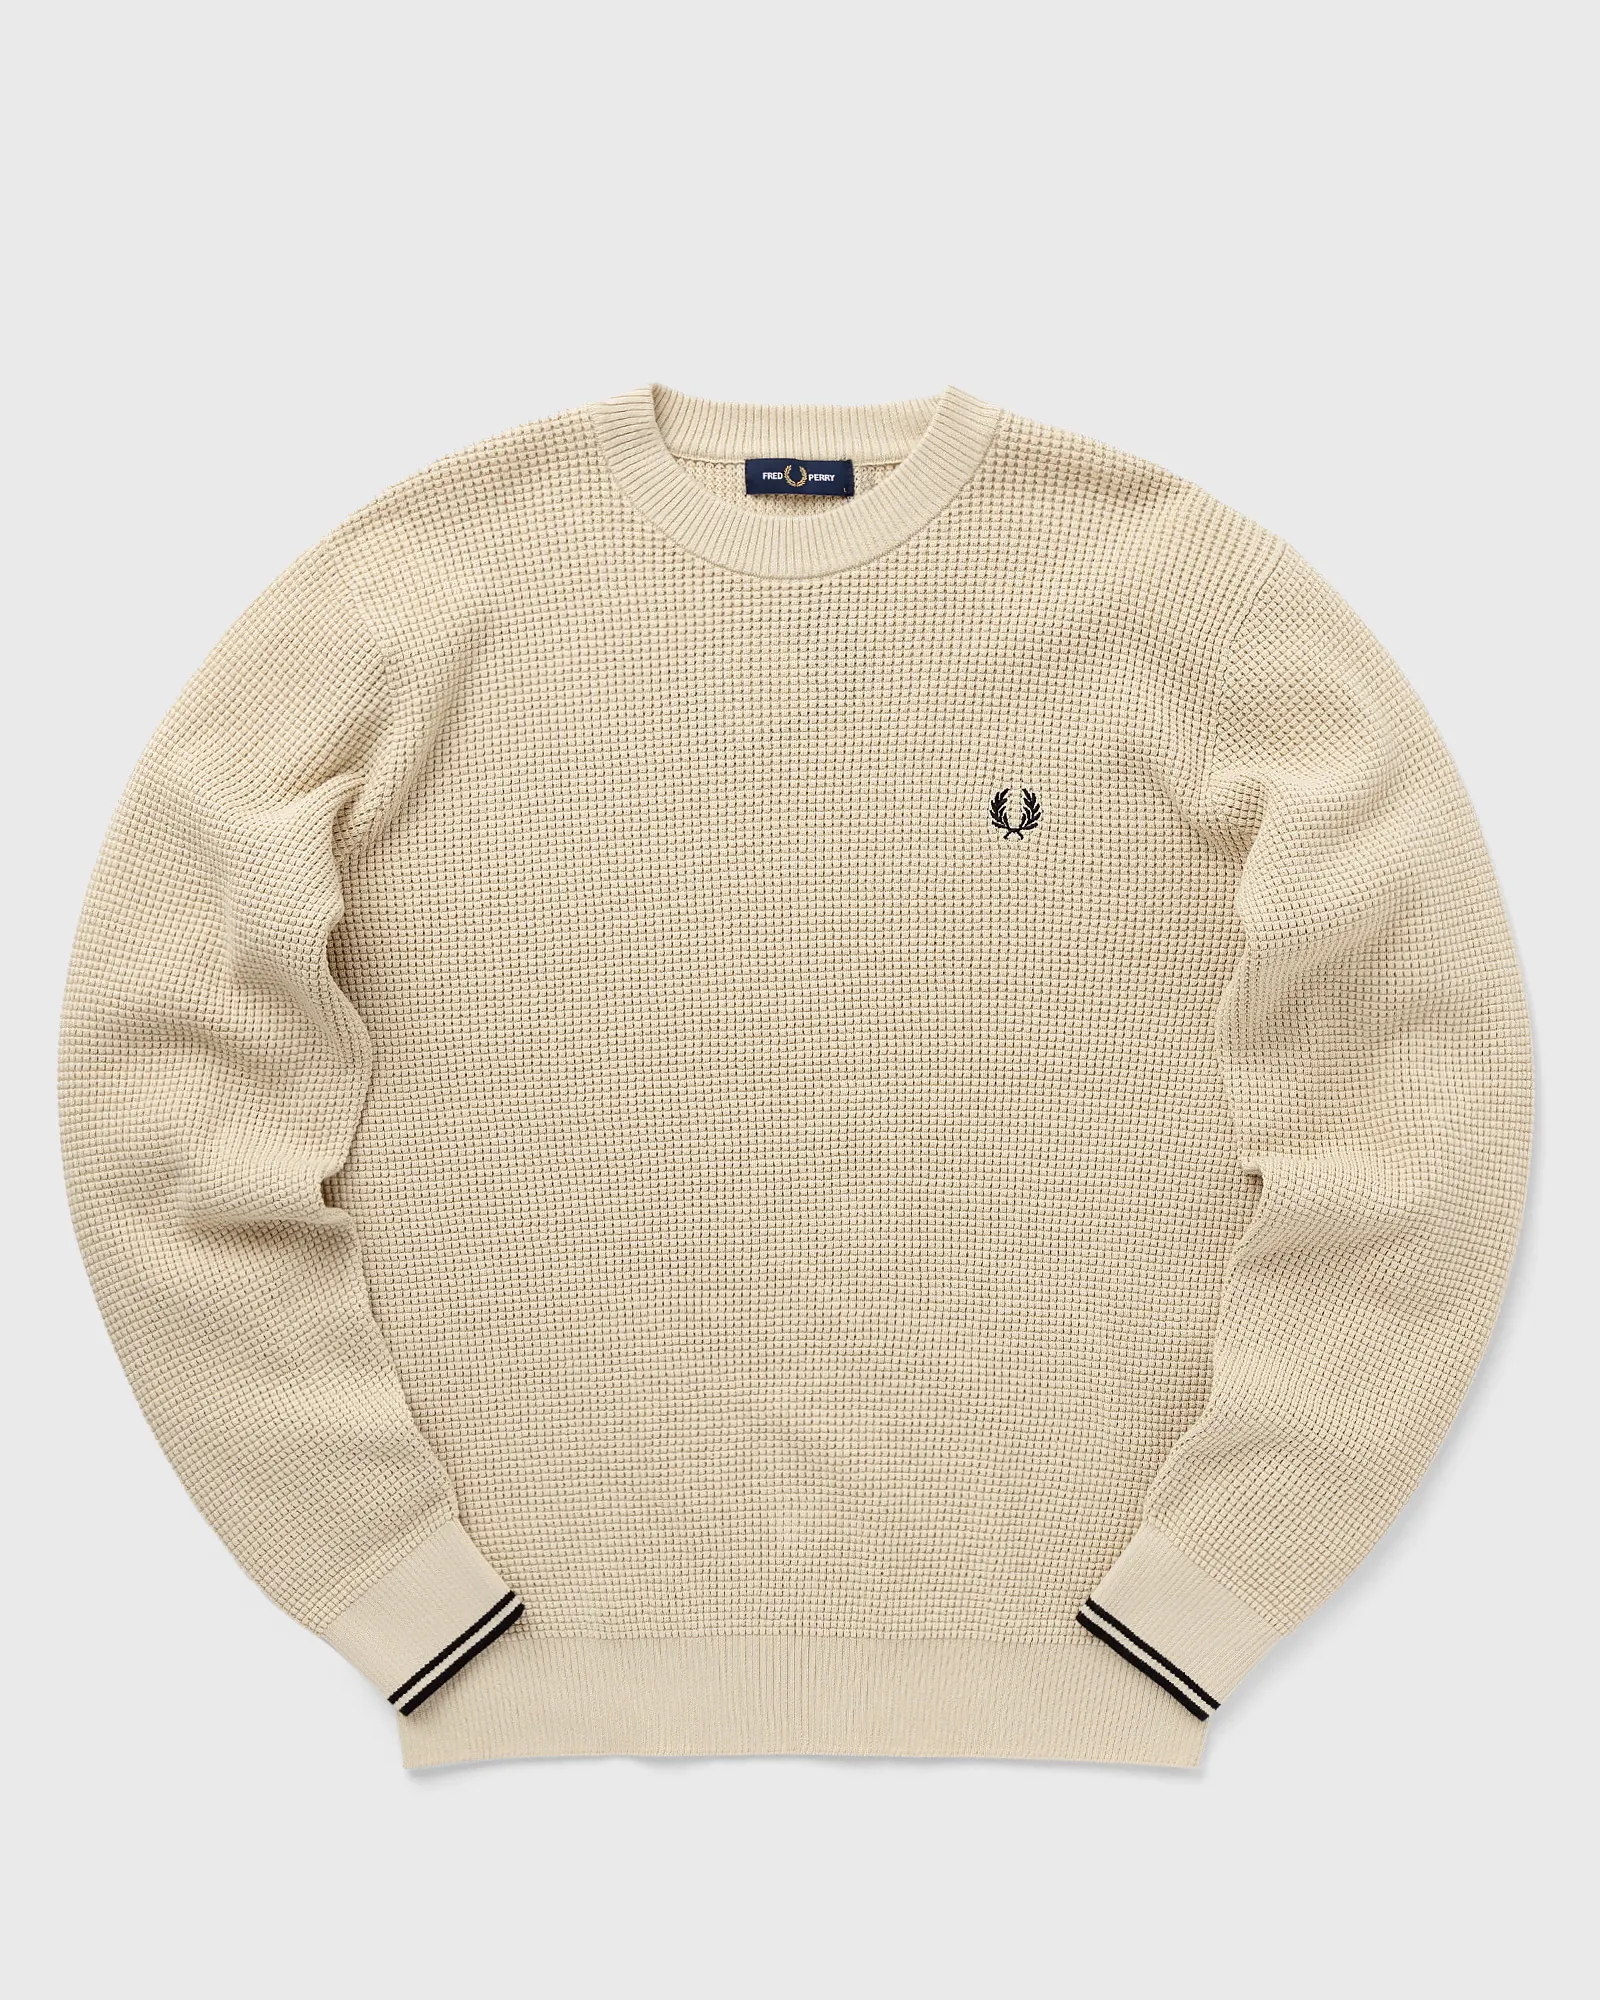 Fred Perry  Waffle Stitch Jumper in Oatmeal